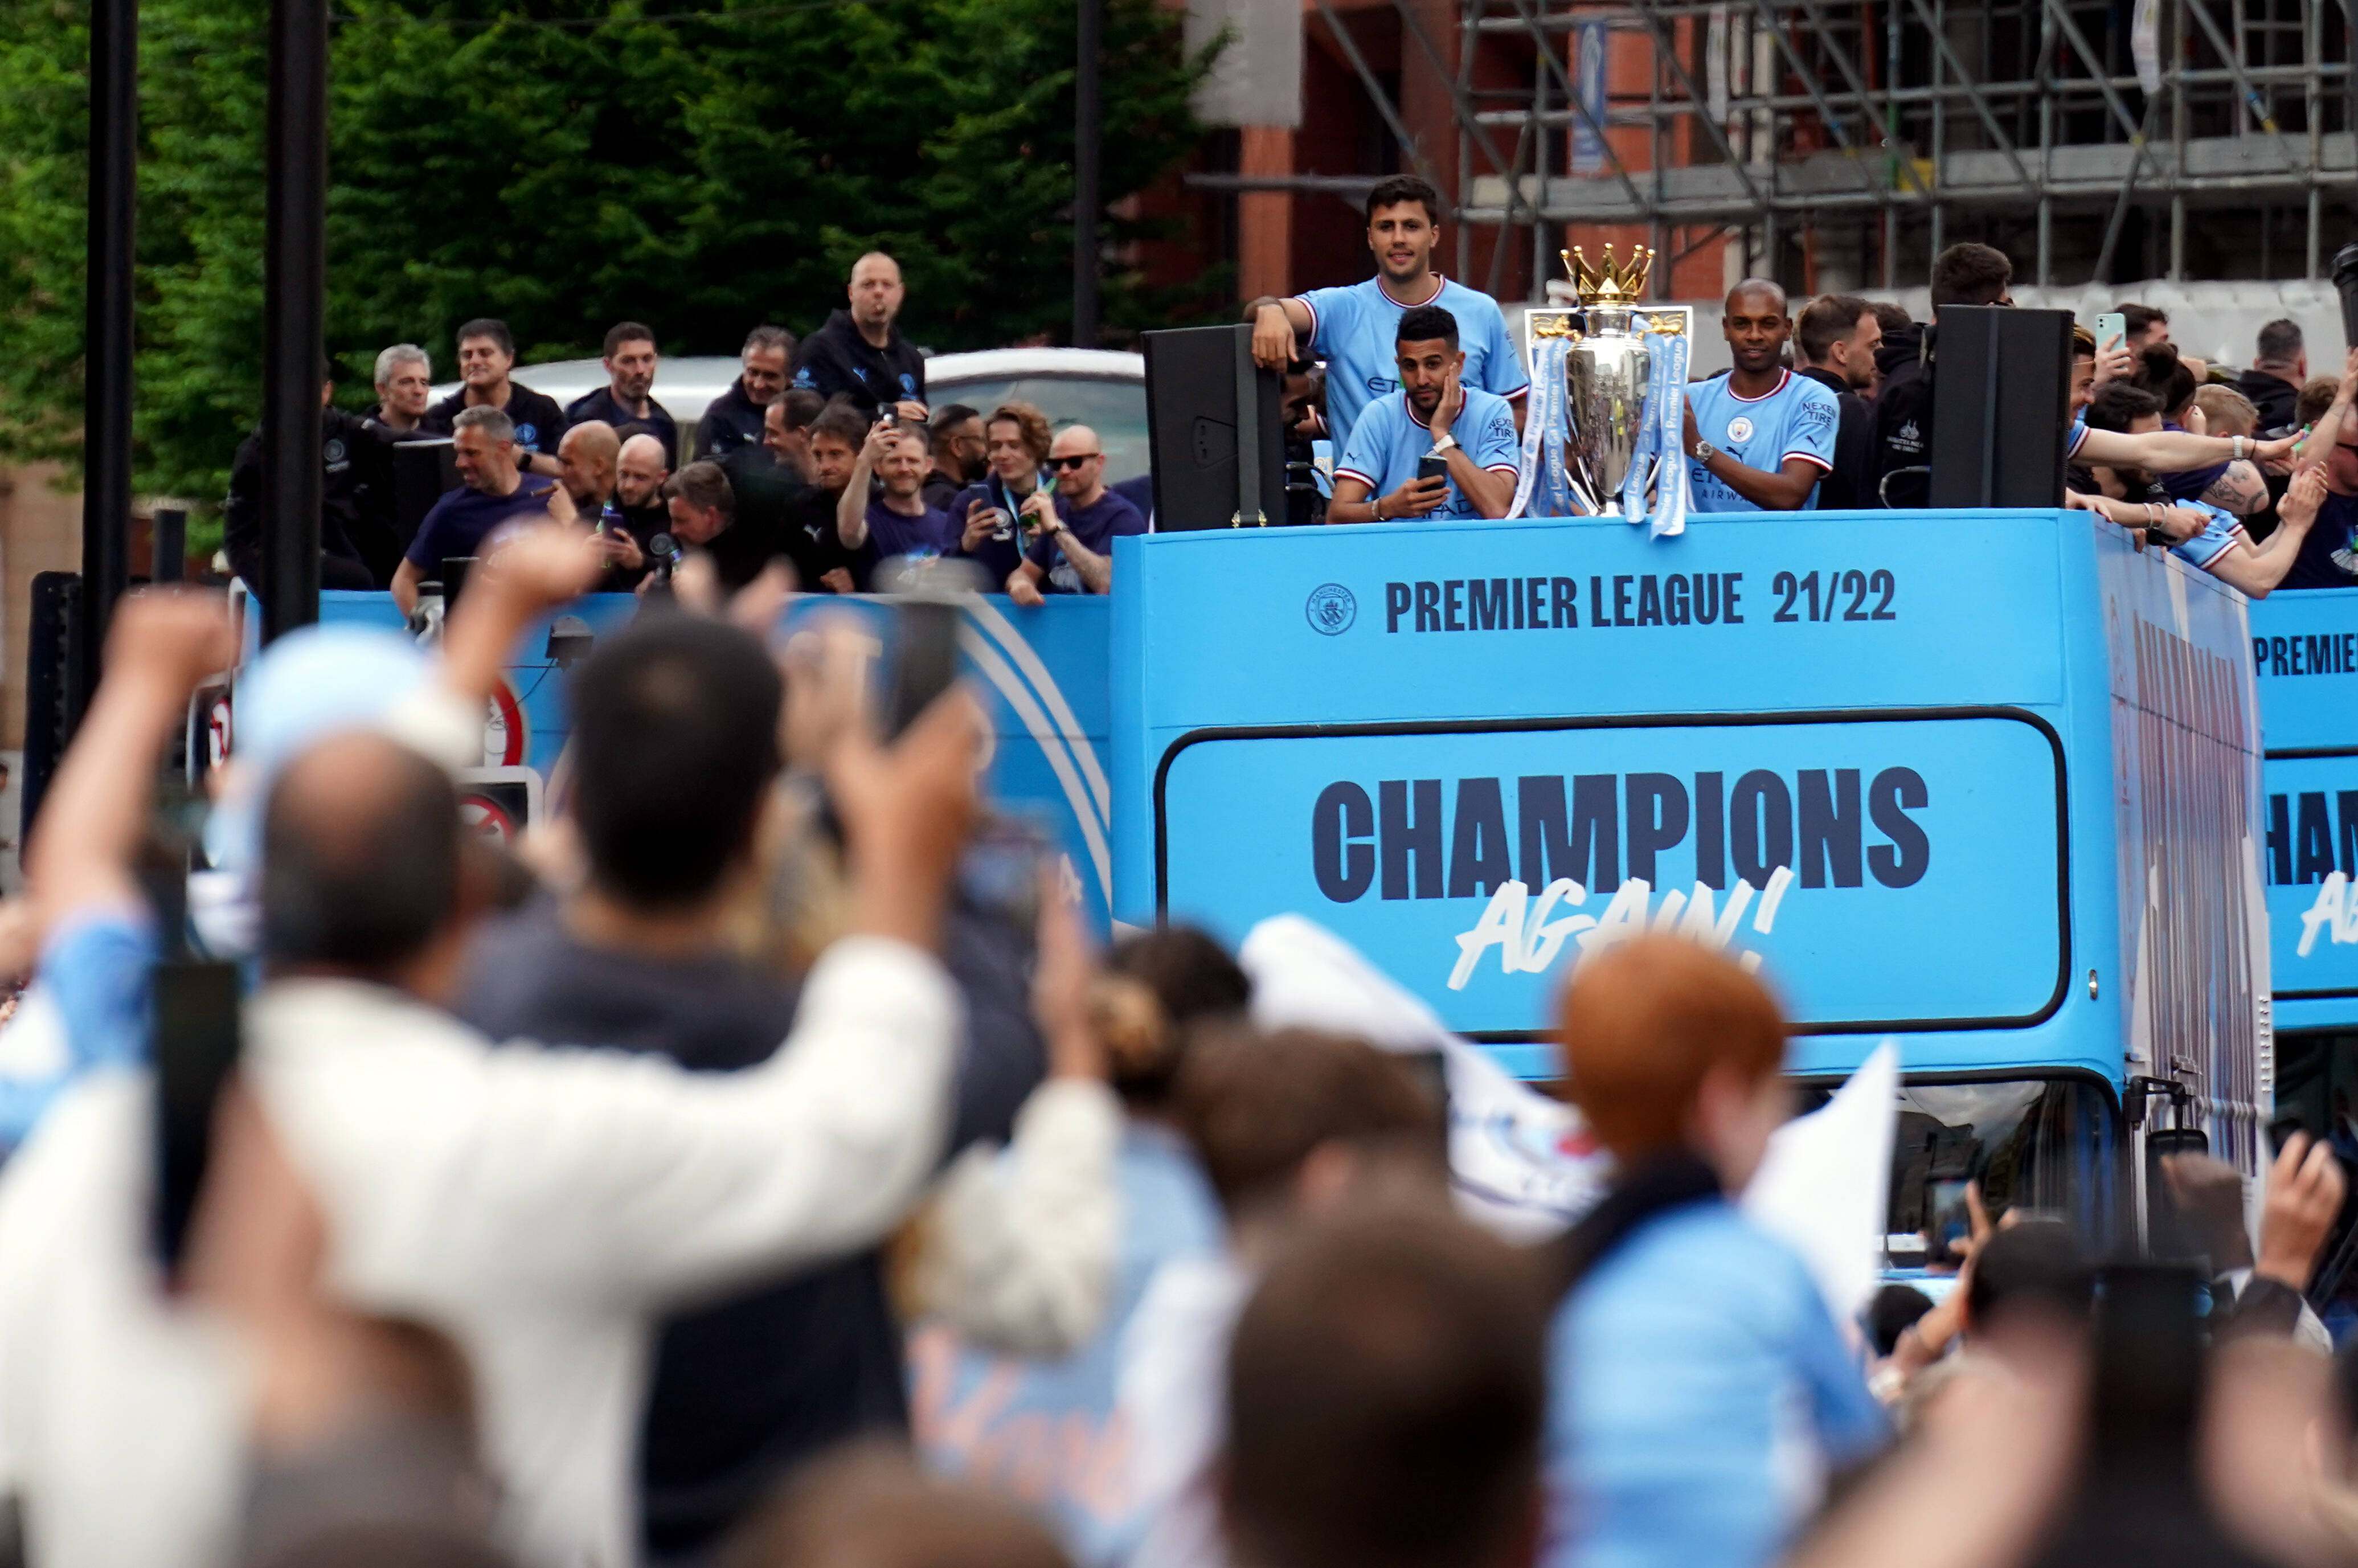 Manchester City's players pictured parading their Premier League trophy from an open-top bus 24 hours after winning it on the final day of the 2021/22 season